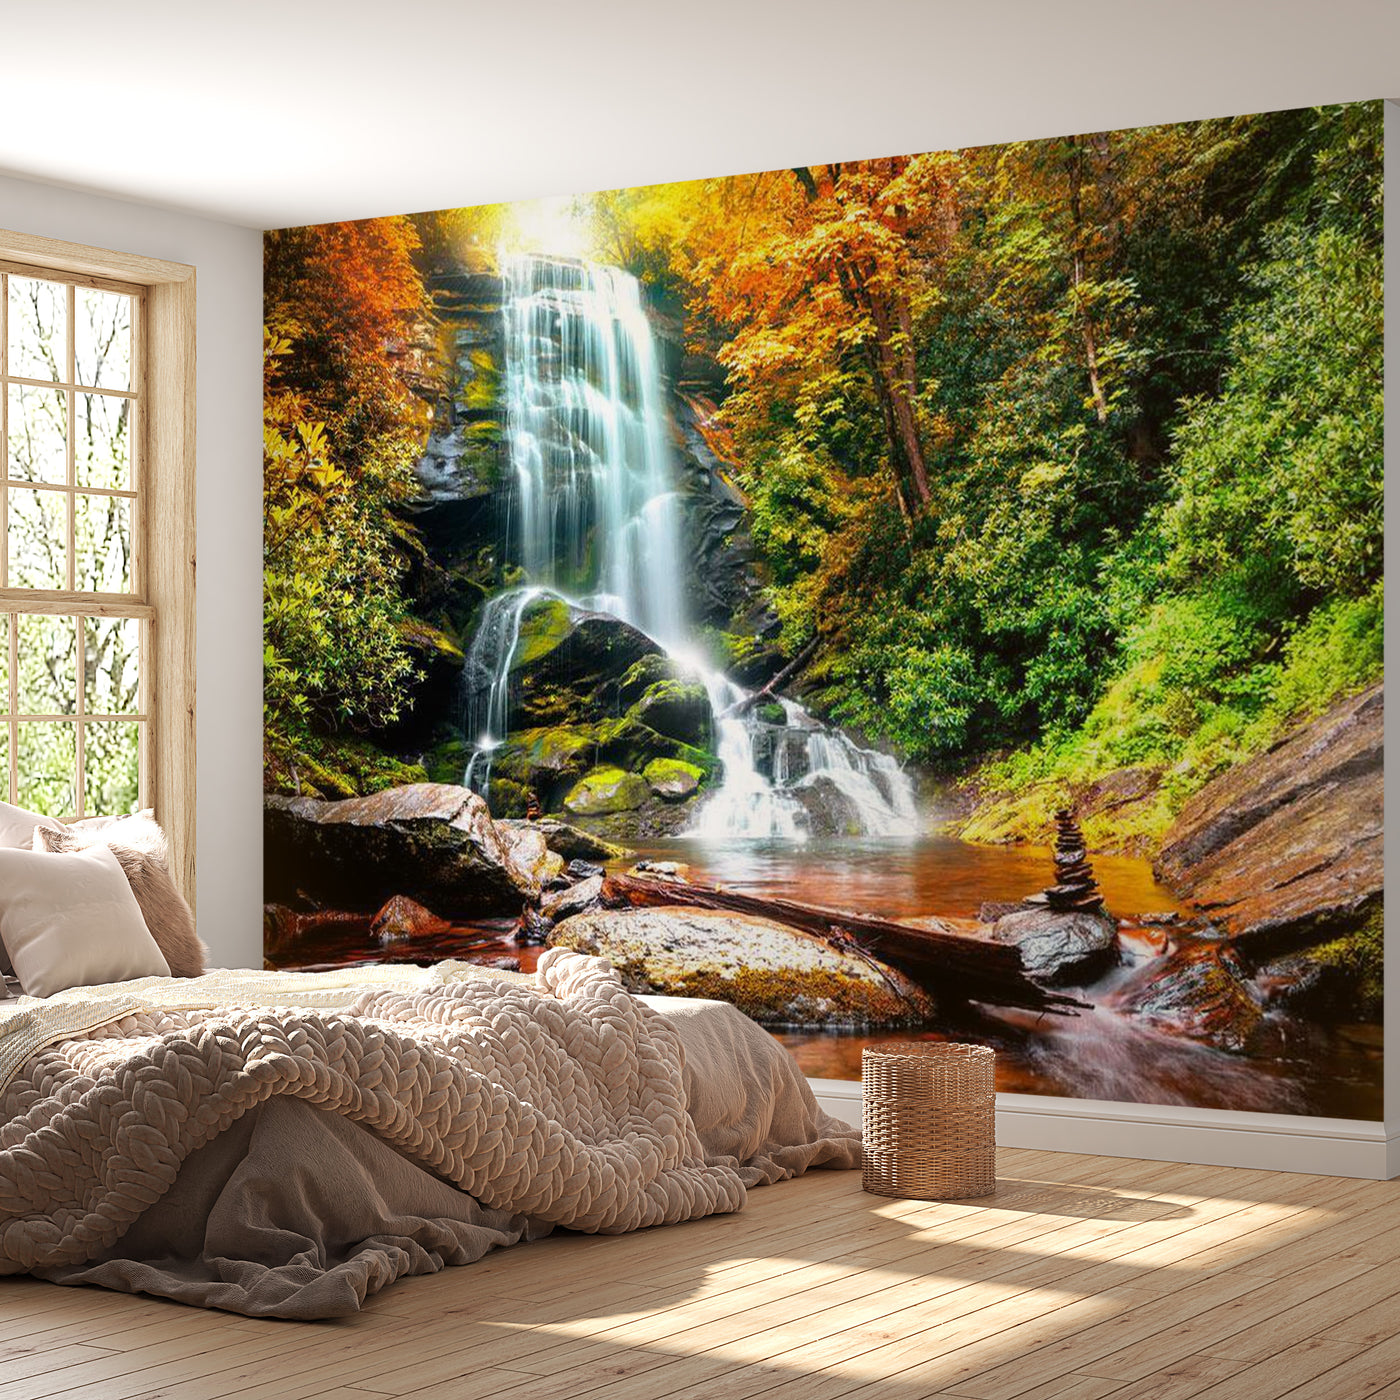 Peel & Stick Forest Wall Mural - Amazing Wonder Of Nature - Removable Wall Decals